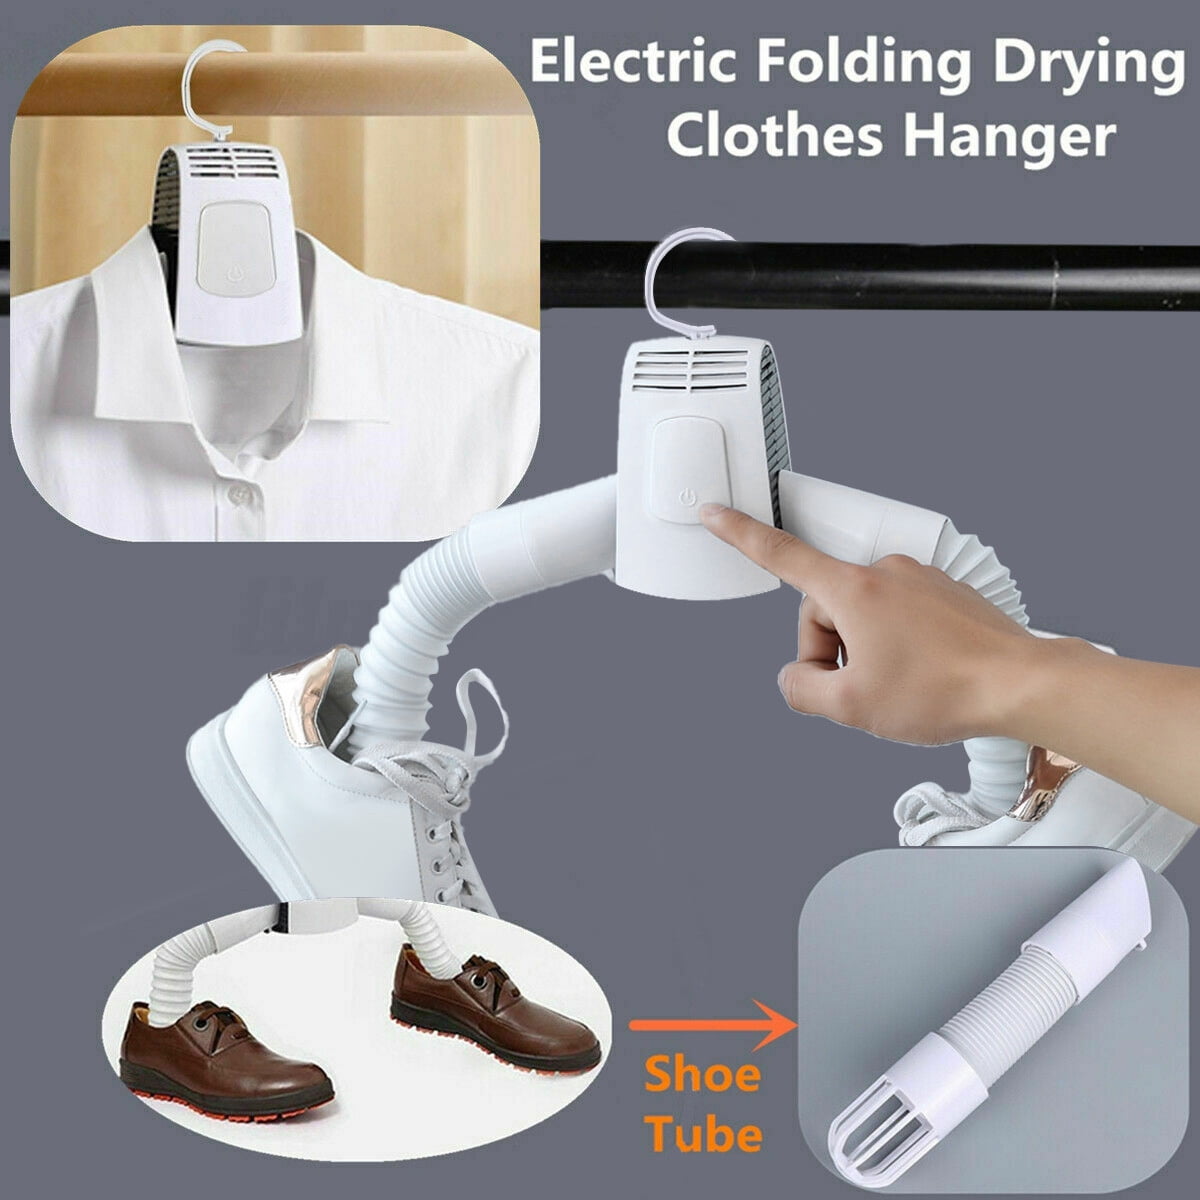 Daxerg Electric Clothes Drying Rack Portable Folding Dryer Hanger for Travel Laundry Shoes 